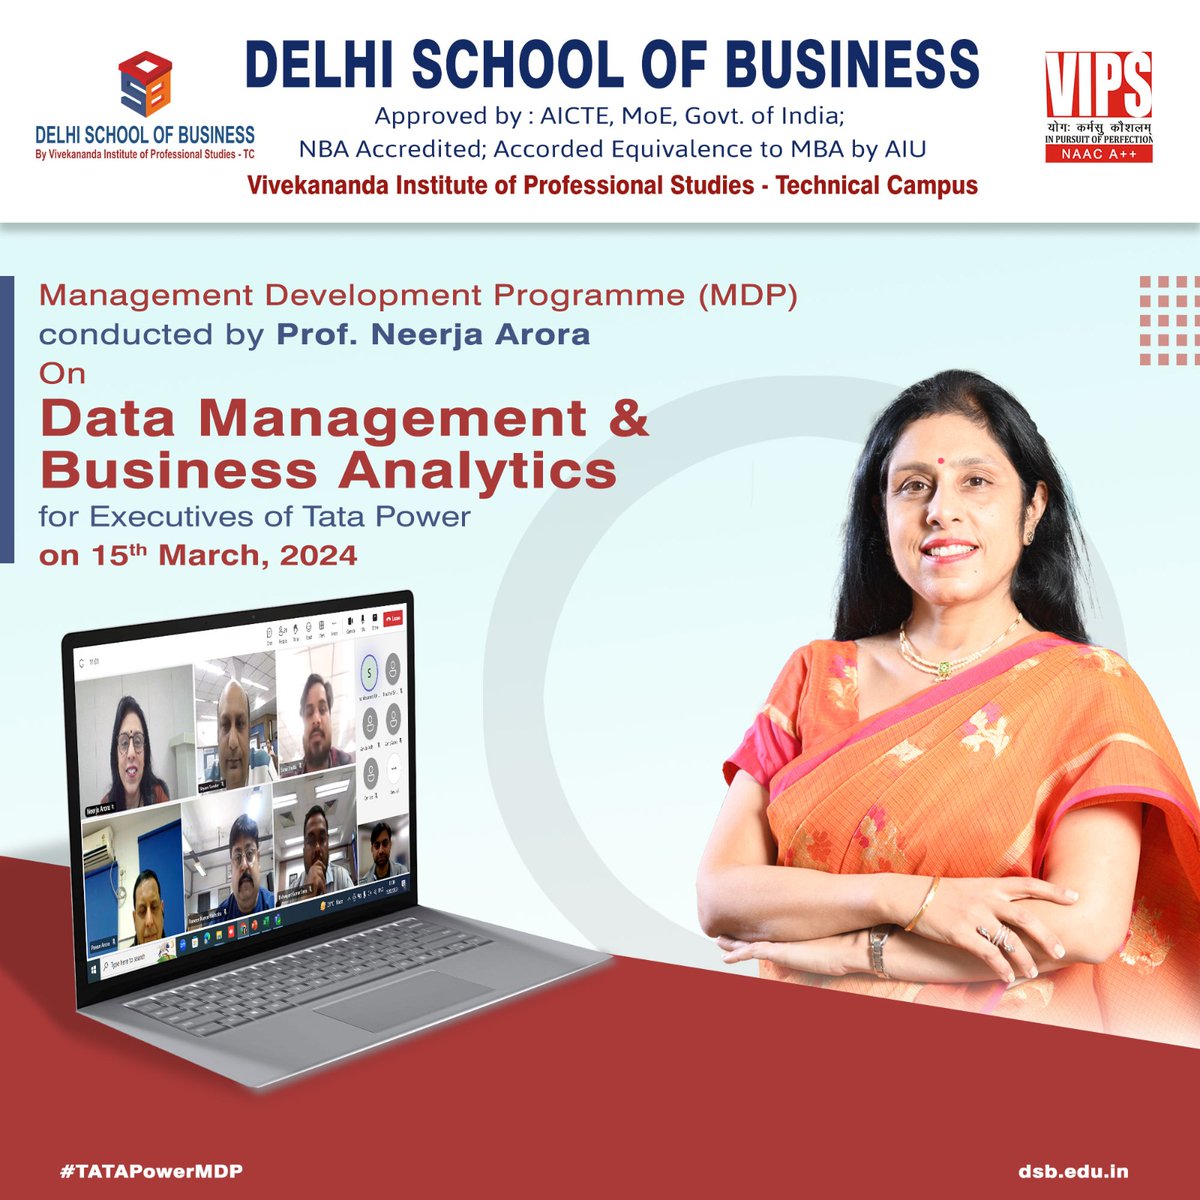 Prof. Neerja Arora, delivered an encouraging MDP session on Data Management & Business Analytics for the Executives of Tata Power, Delhi. Held on March 15, her session offered interesting insights into data visualization and analytics.